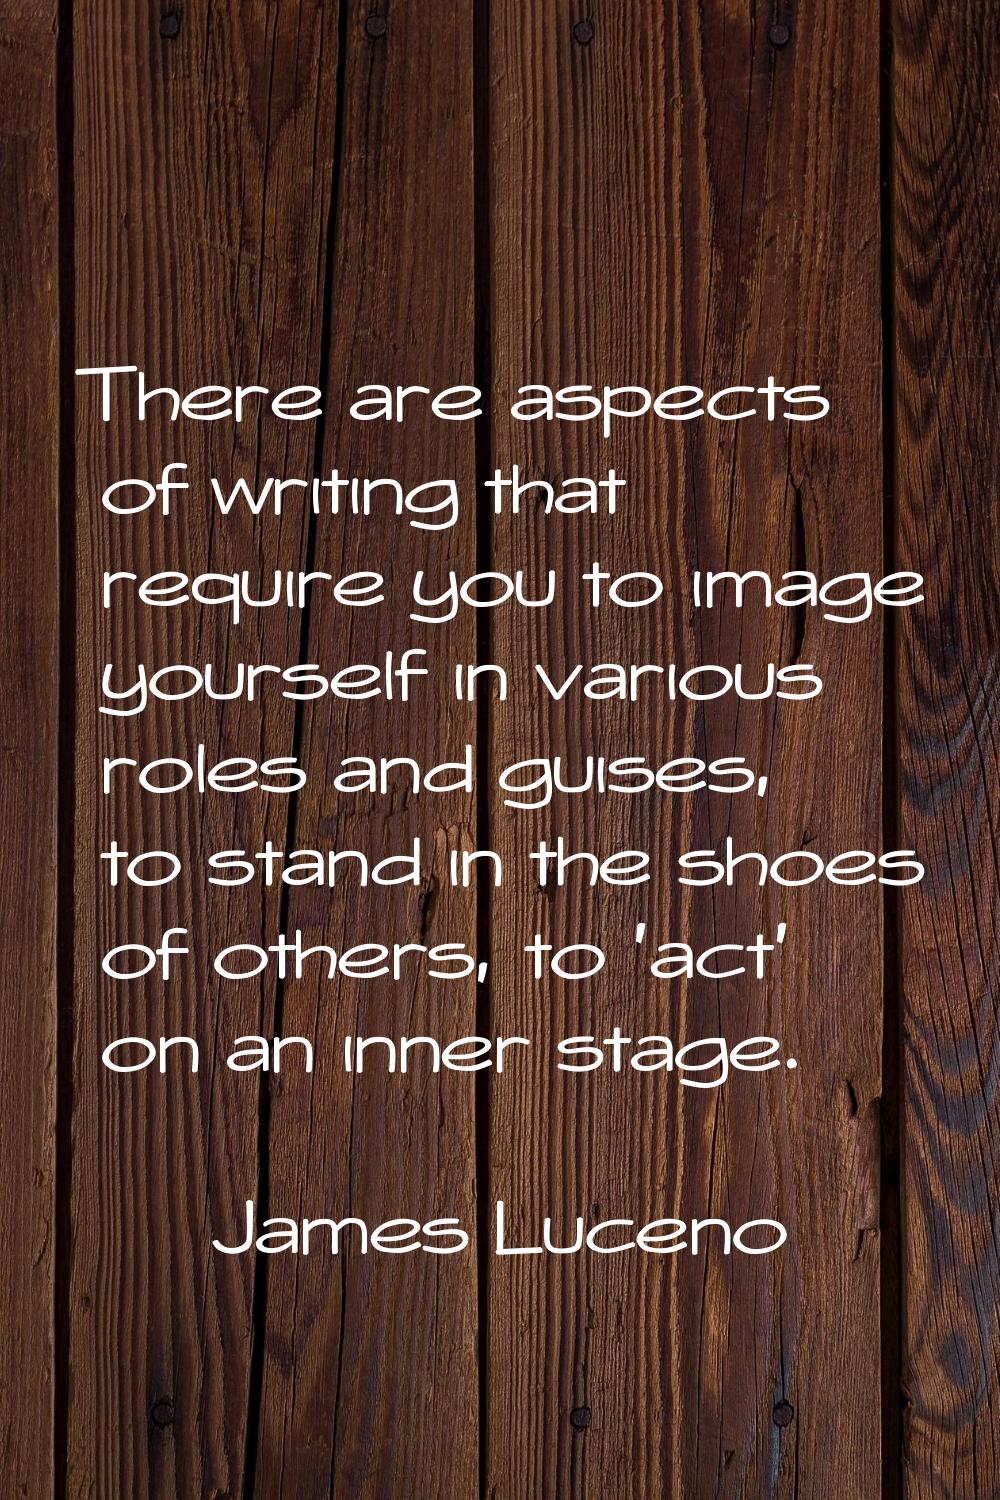 There are aspects of writing that require you to image yourself in various roles and guises, to sta